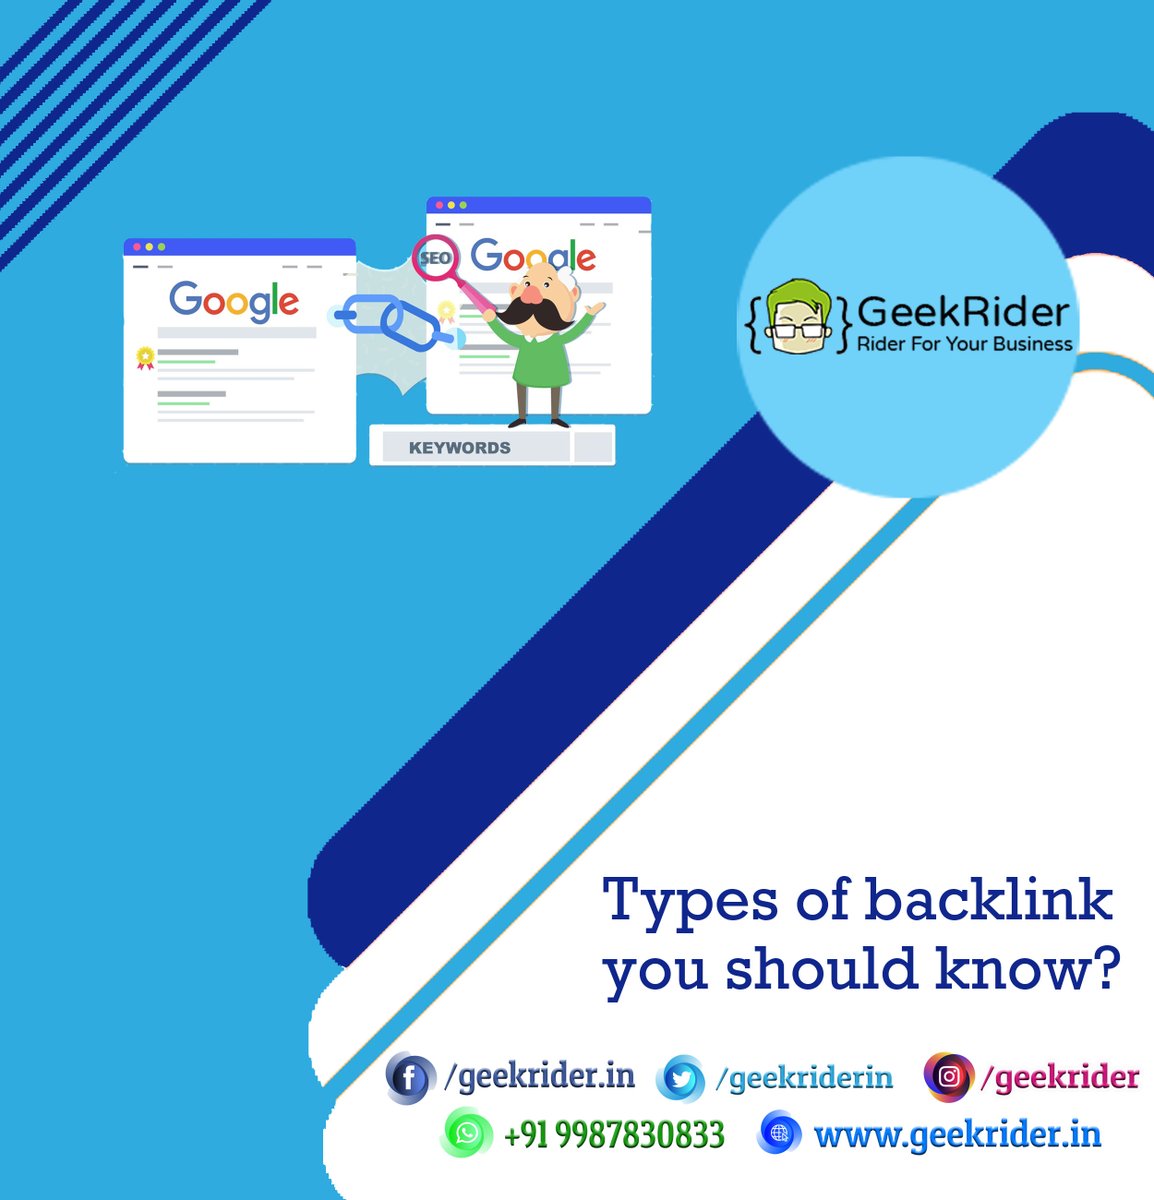 Types of backlink you should know?

🔗 Nofollowed
🔗 Followed
🔗 Sponsored/paid
🔗 UGC
🔗 High authority
🔗 Toxic/Unnatural
🔗 Editorially placed

#geekrider @GeekRiderin #backlink #keywords  #corporatecard #contentmarketing #sponsored #paid #highauthority #toxic #unnatural #SEO